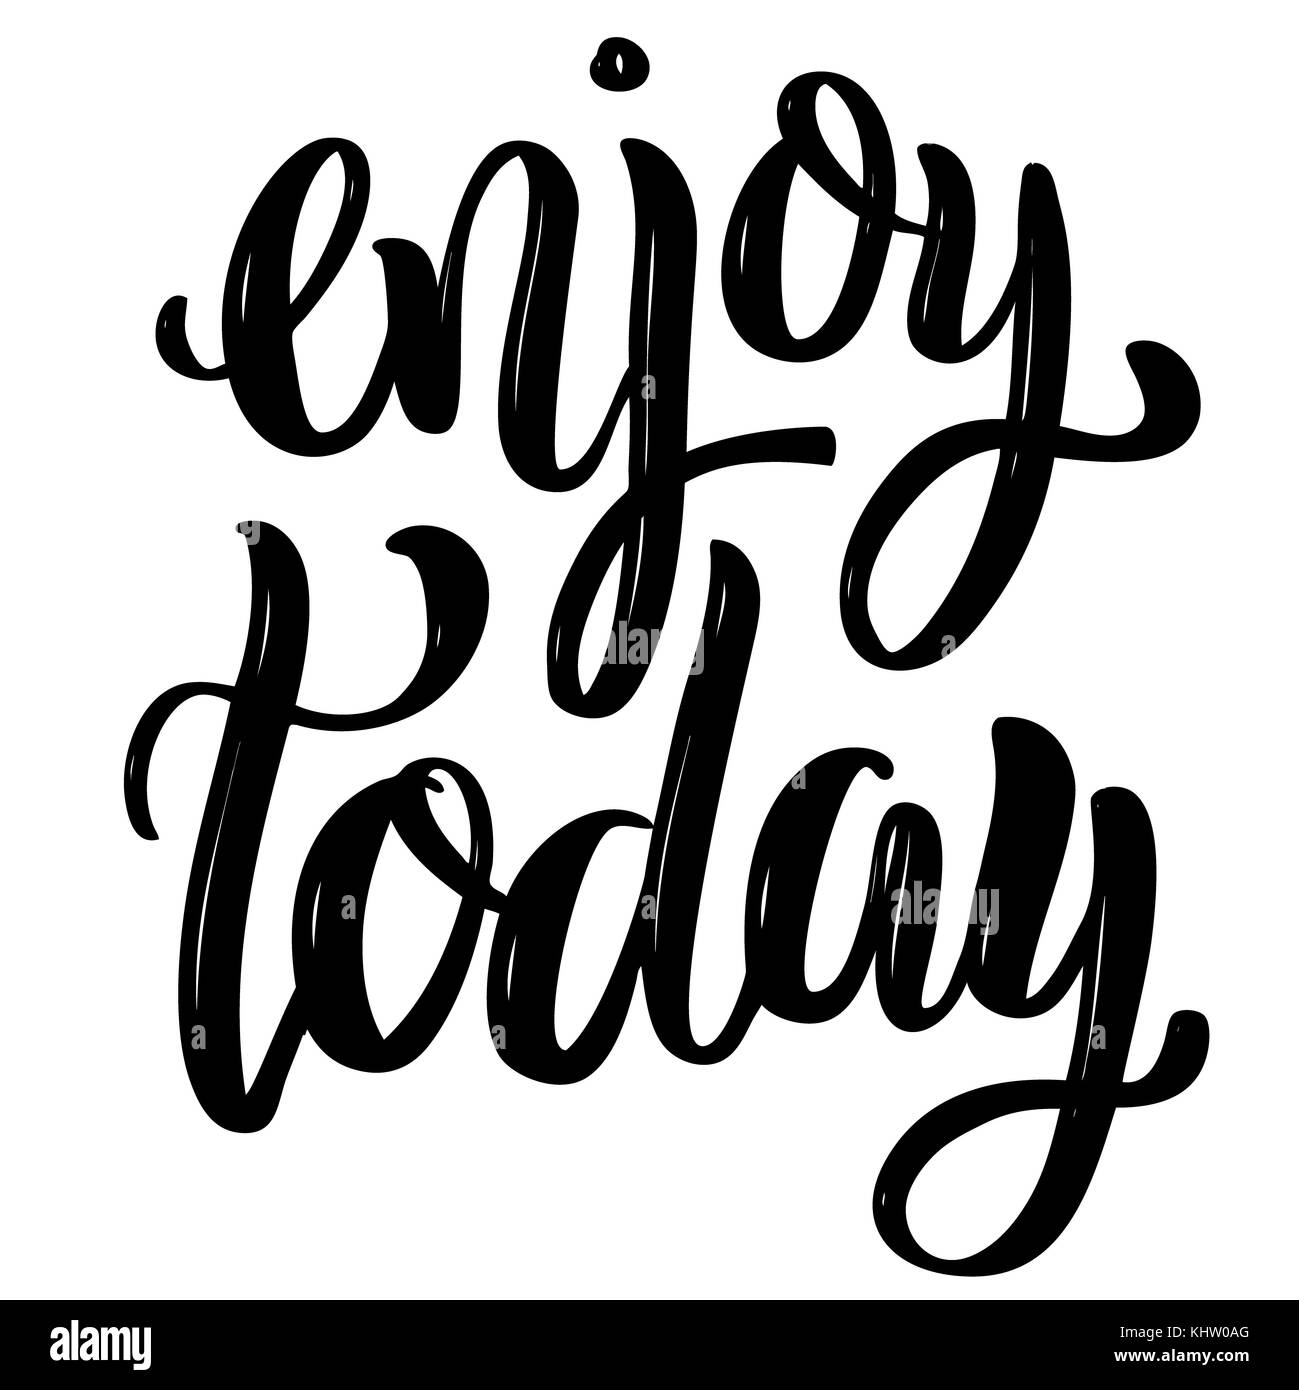 Enjoy today. Hand drawn motivation lettering quote. Design element for poster, banner, greeting card. Vector illustration Stock Photo